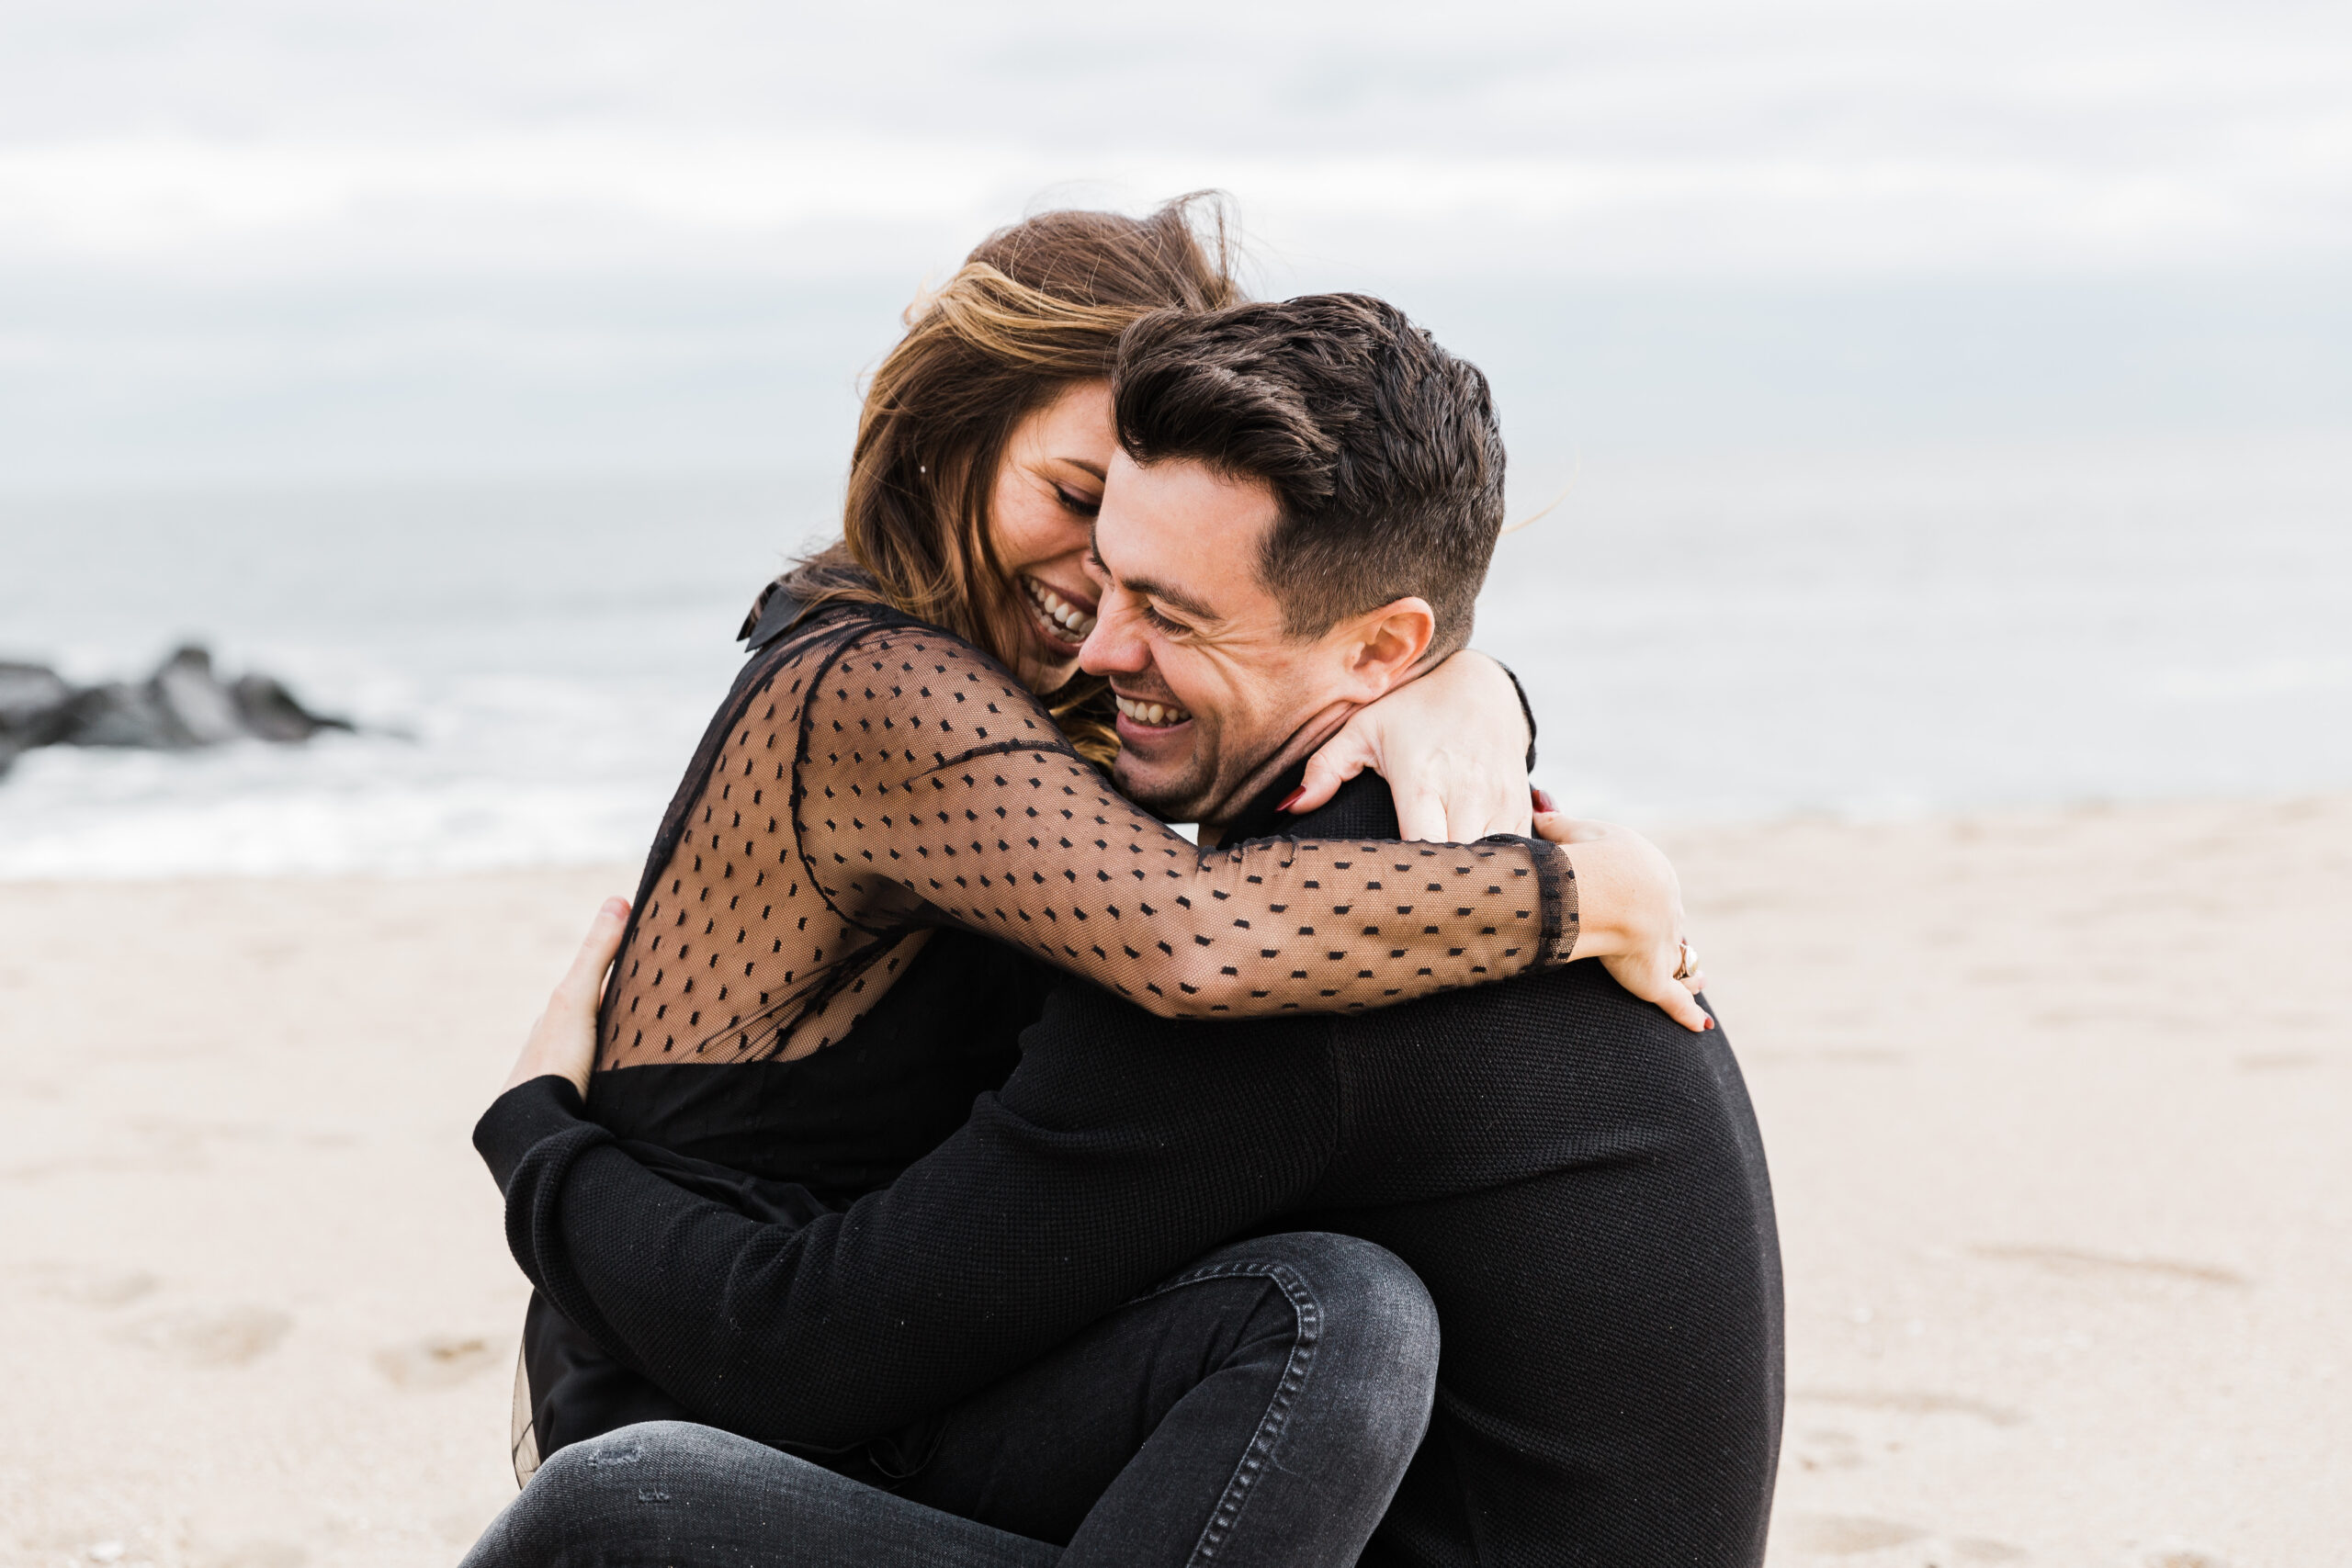 couples session, engagement photos, new jersey photographer